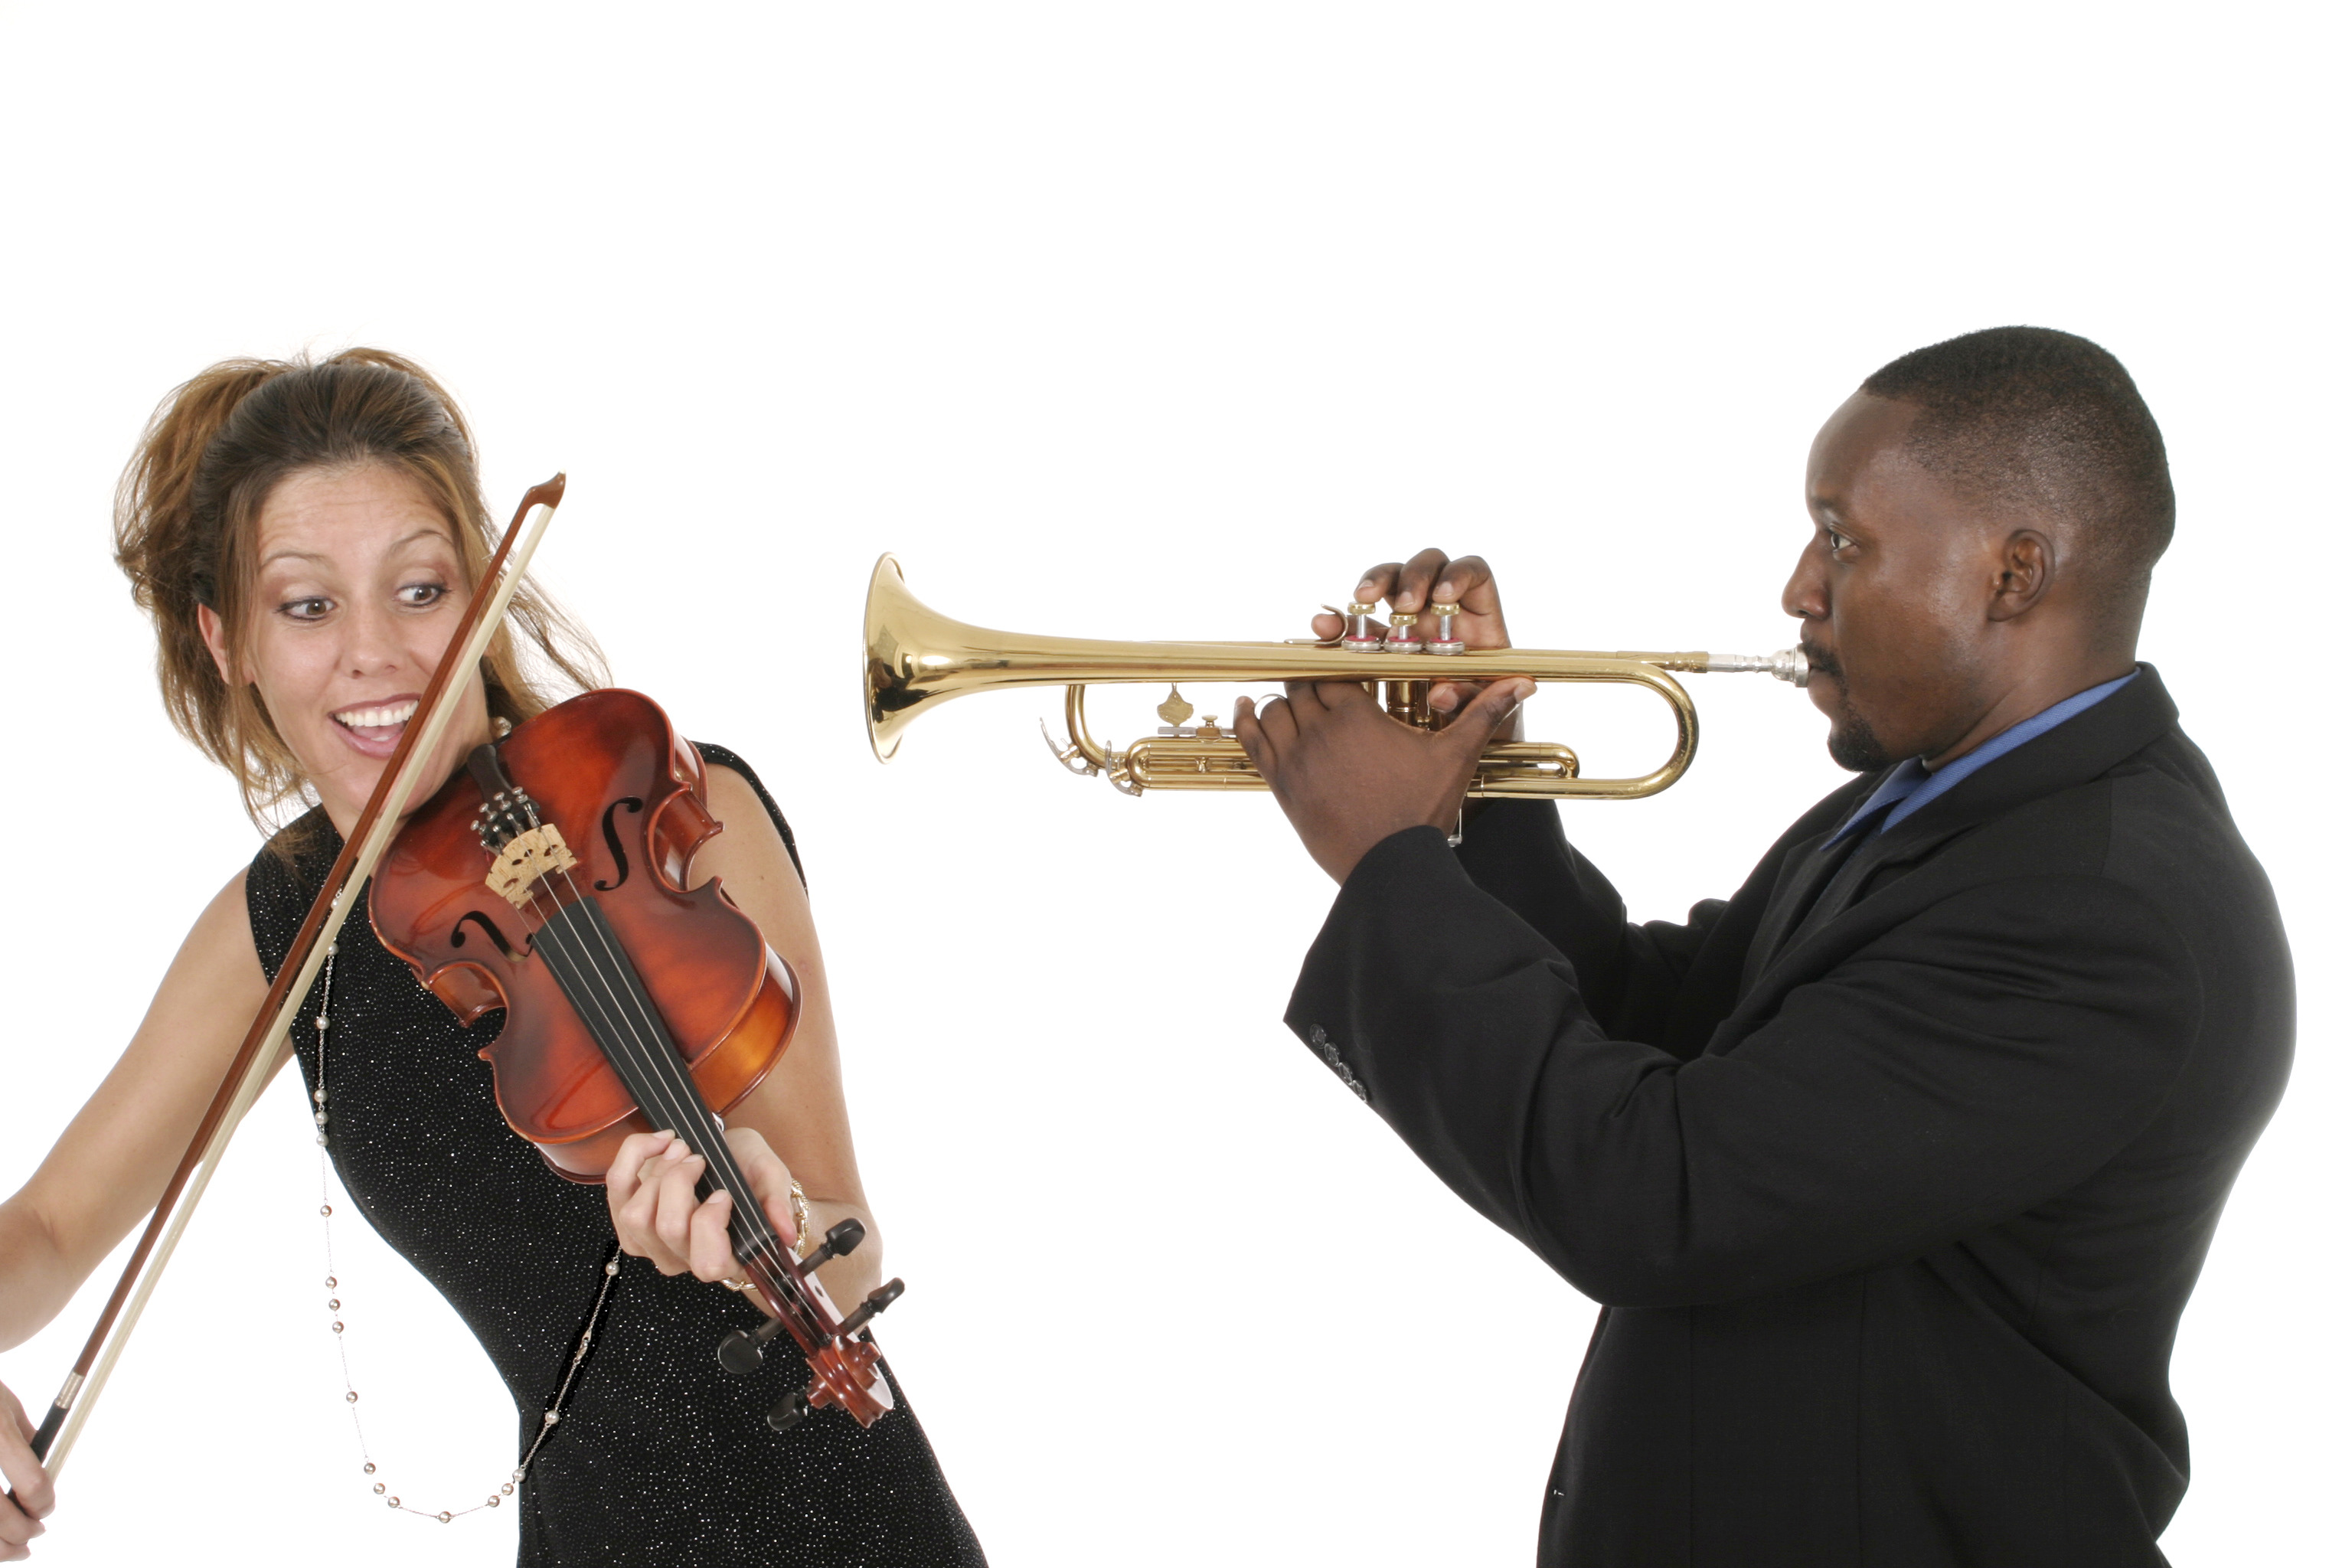 photo of a violinist tyring to distance herself from a trumpet player